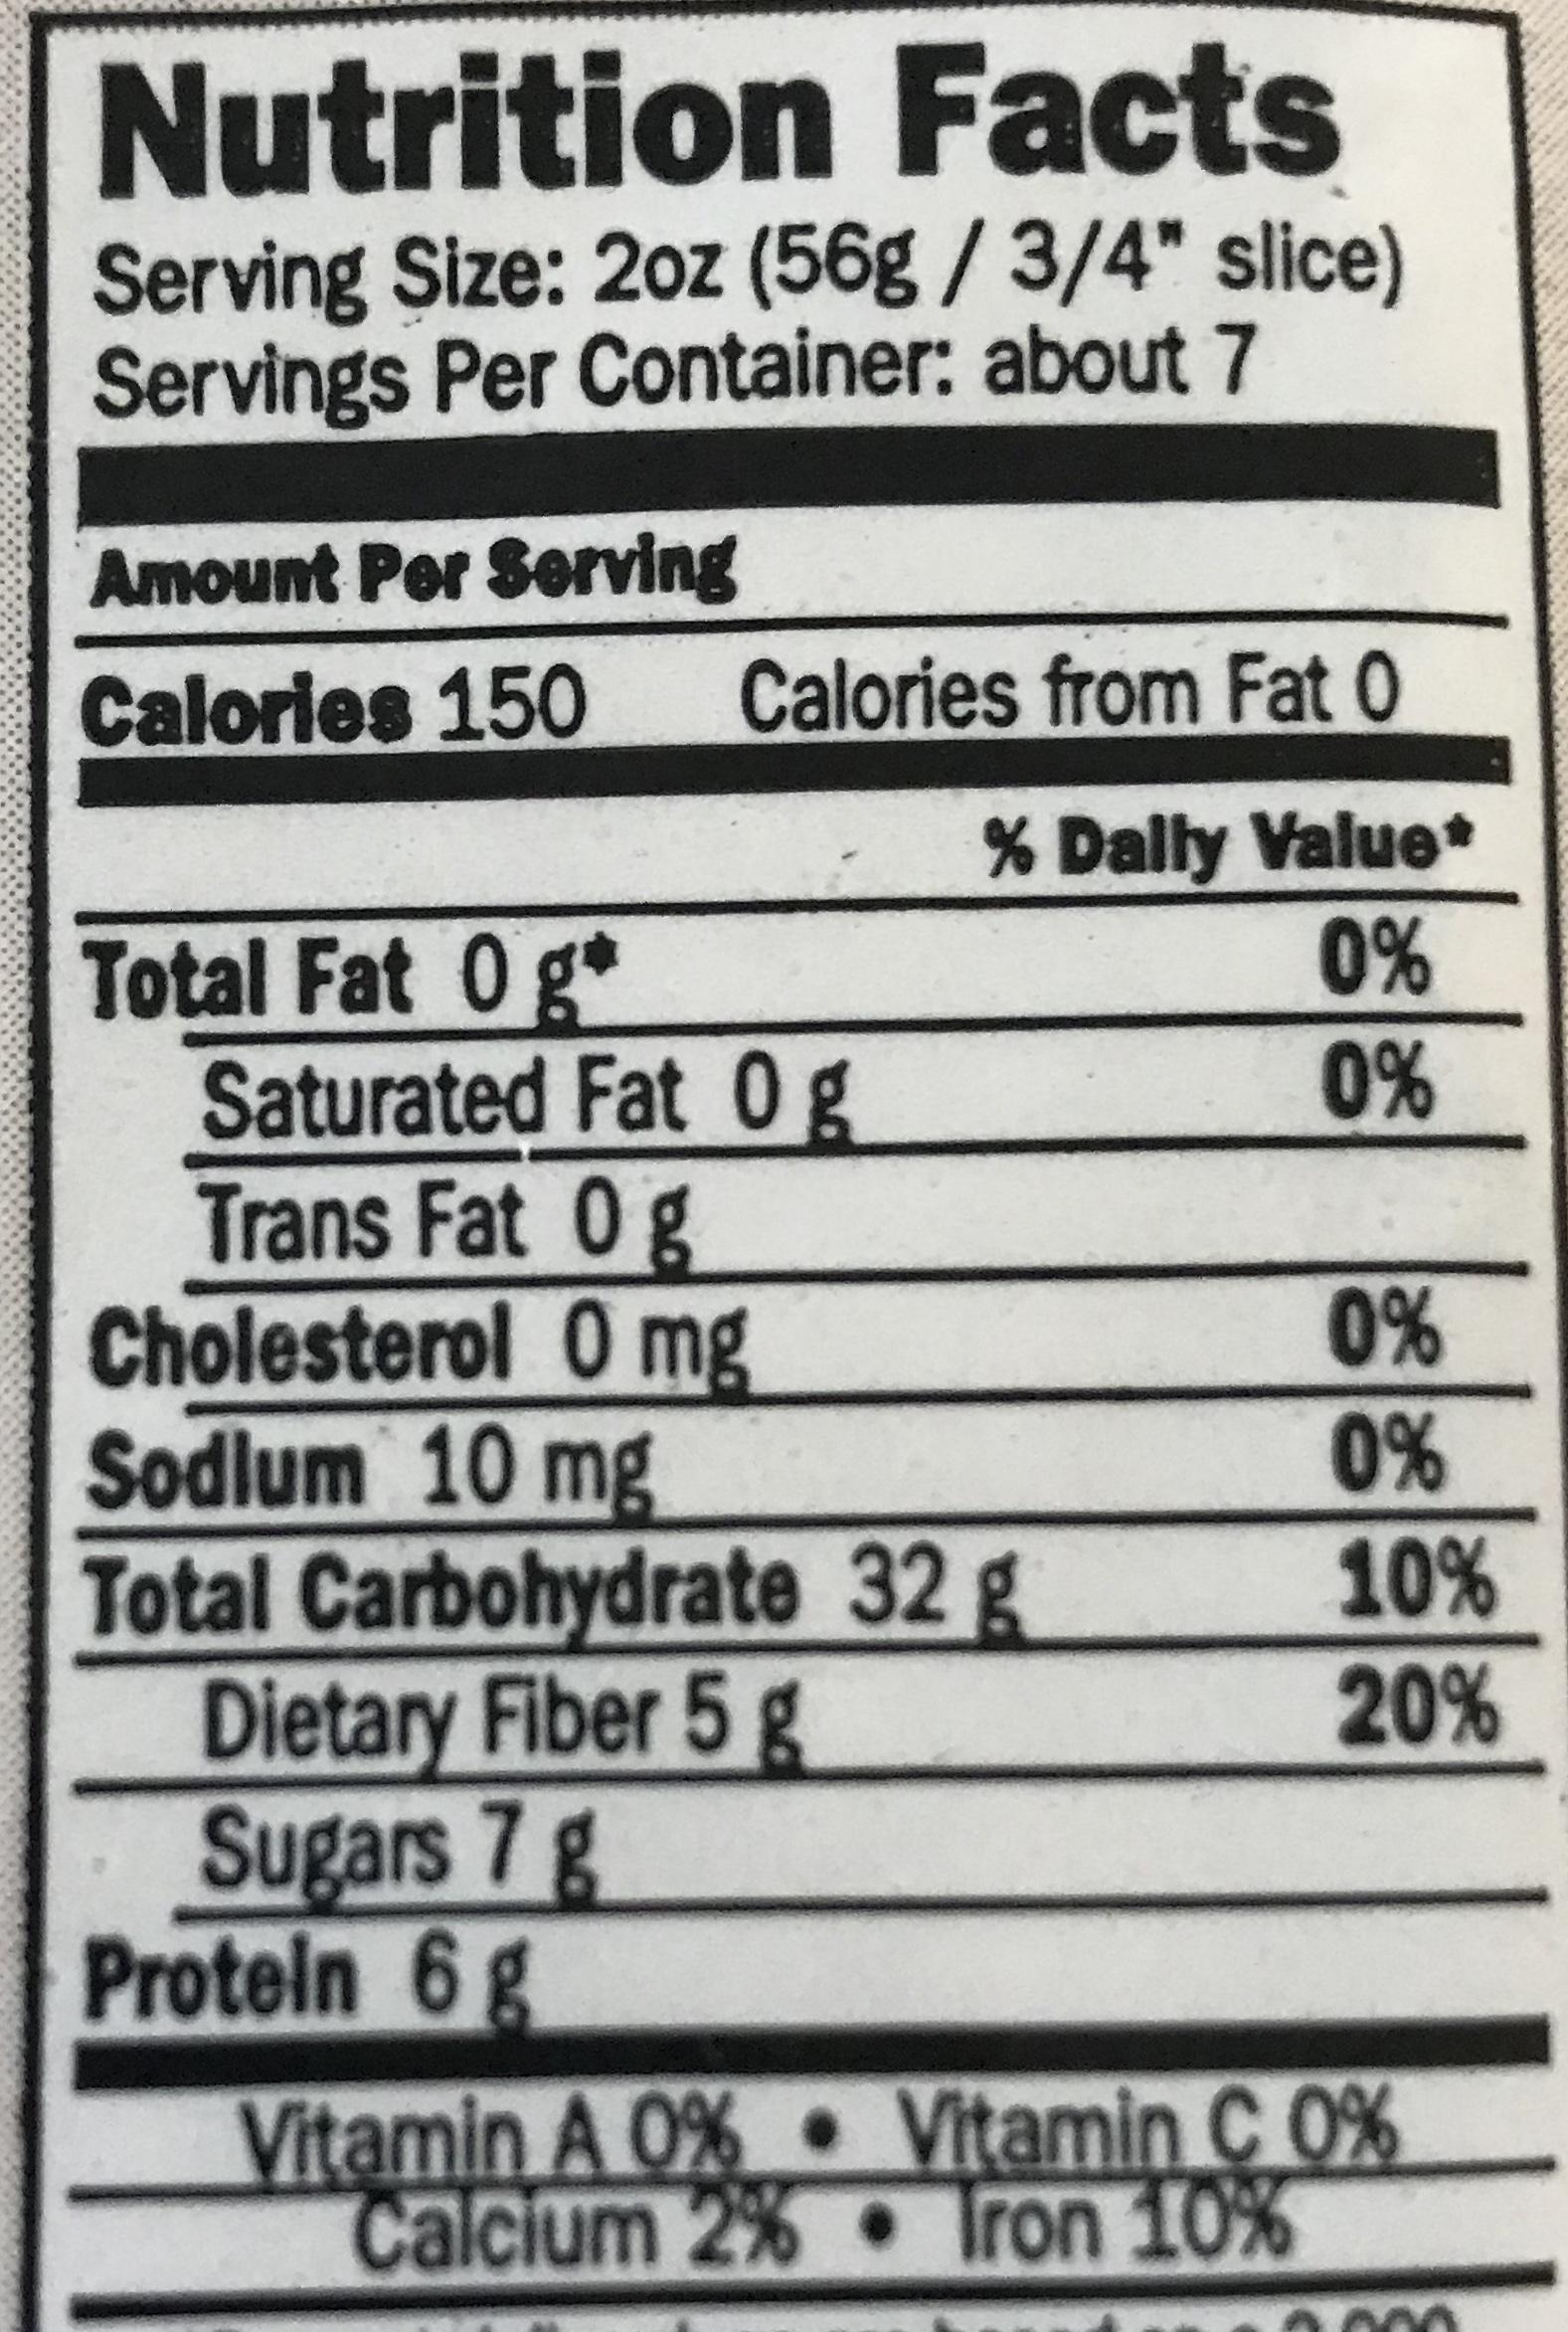 Nutrition Facts for Manna Bread. There is 7g of sugar per serving.